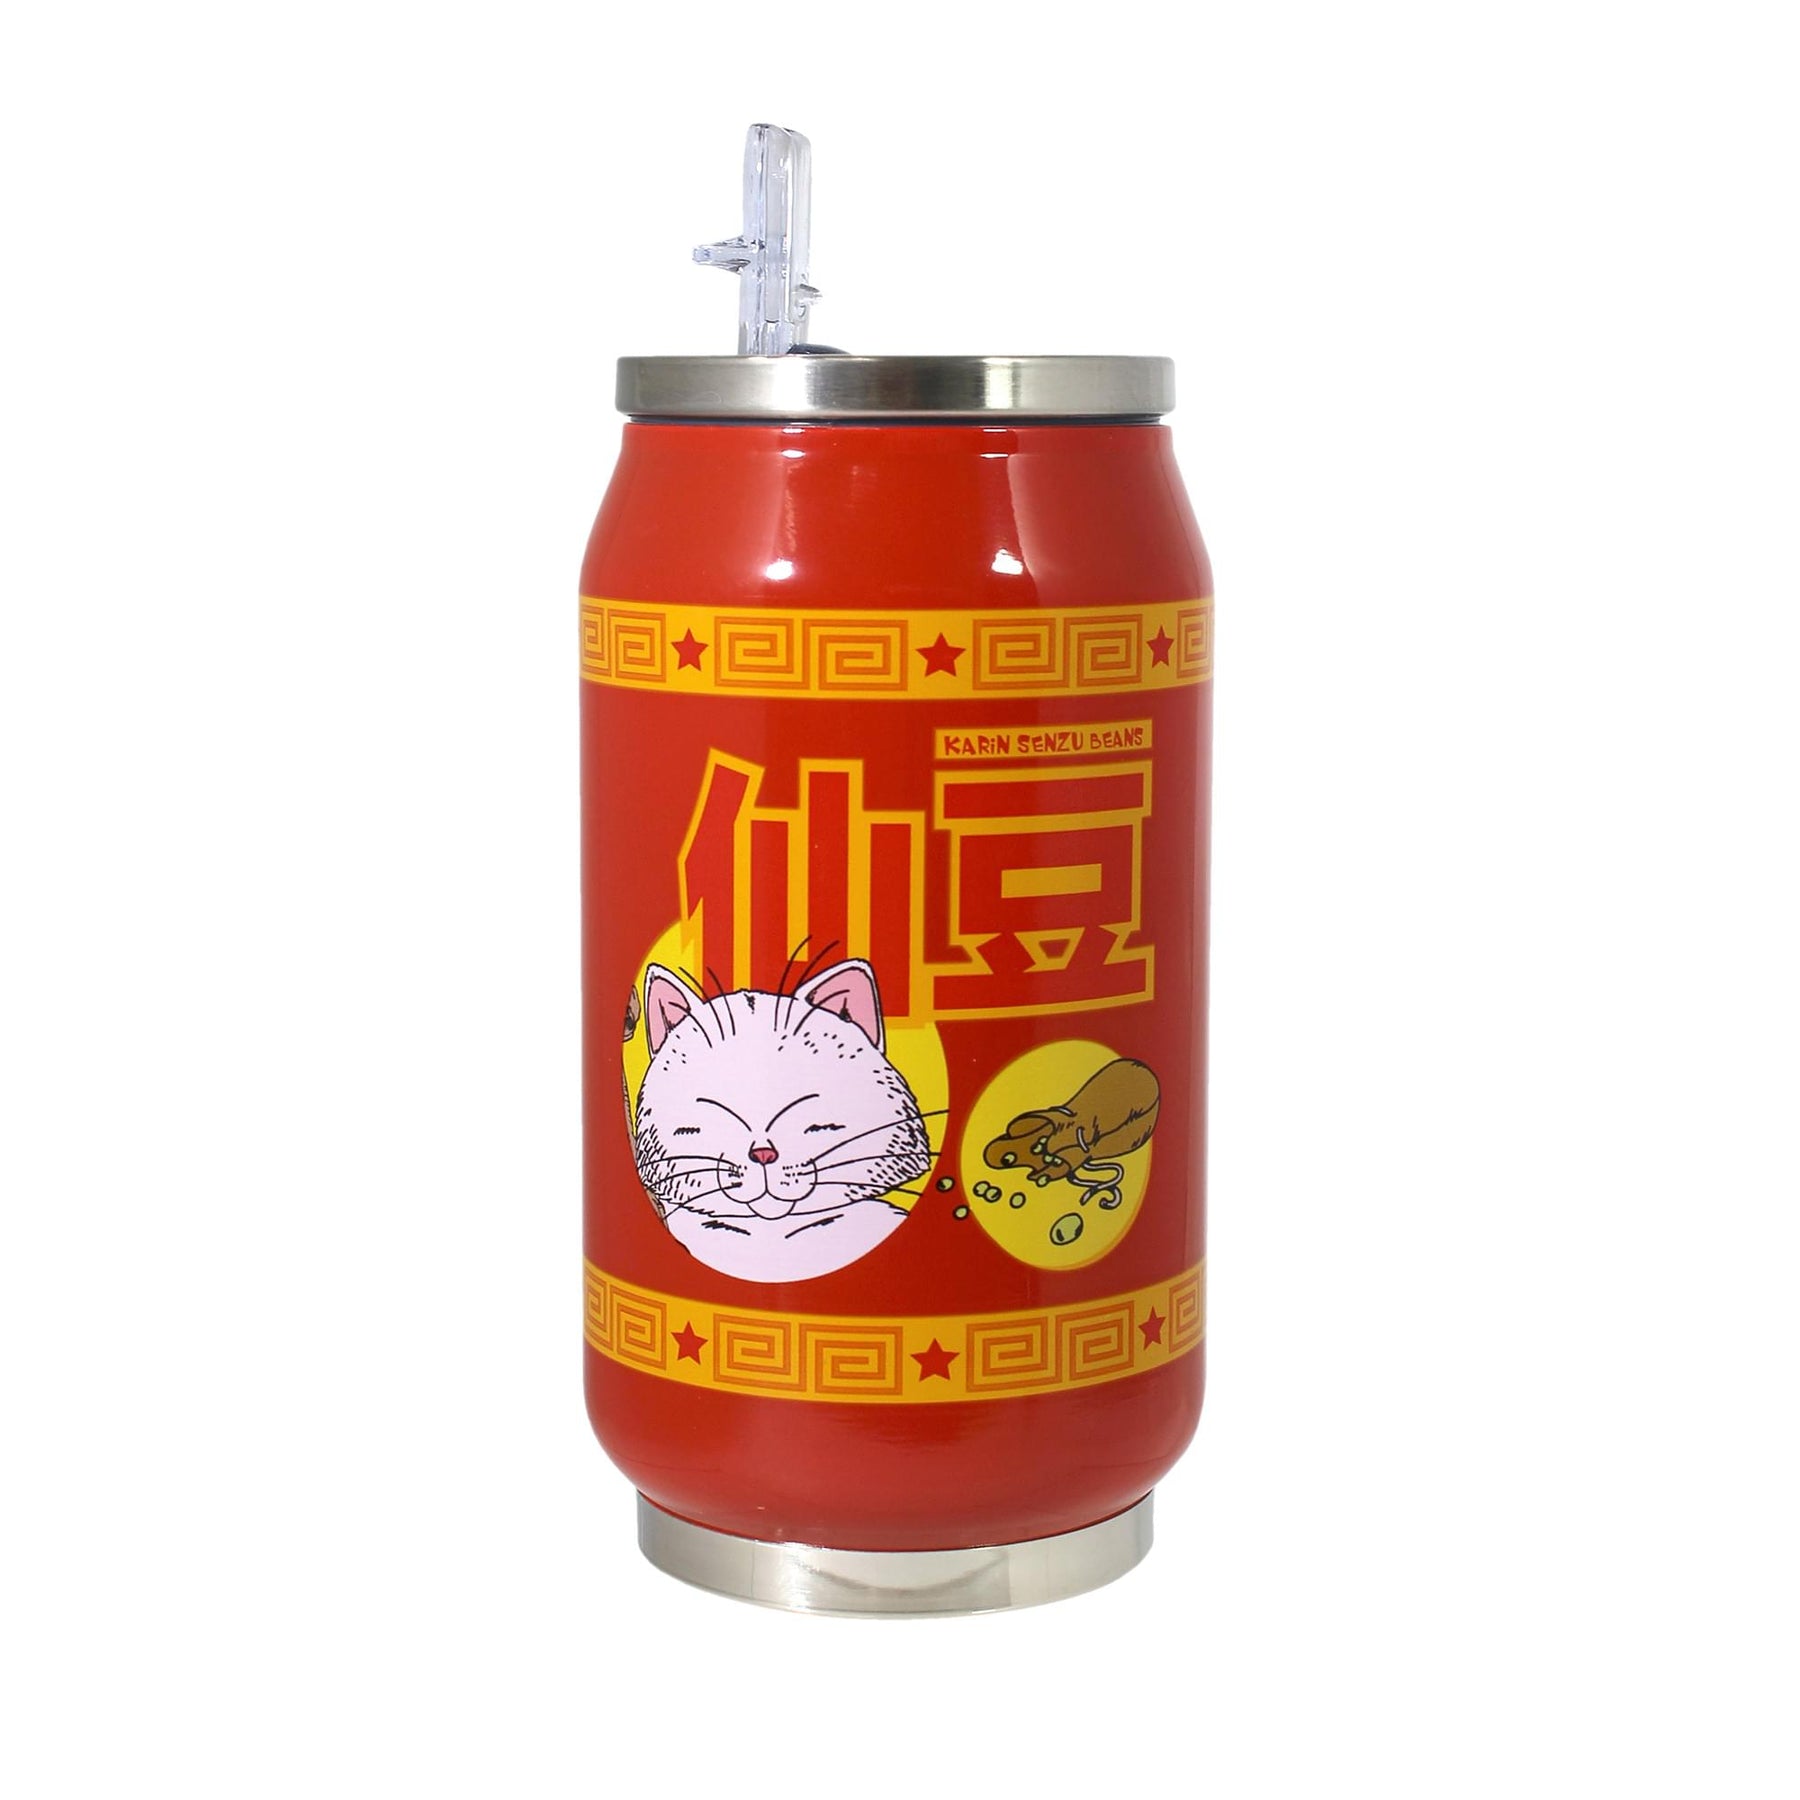 Dragon Ball Z Korin Senzu Beans 10oz Stainless Steel Thermo Cool Can